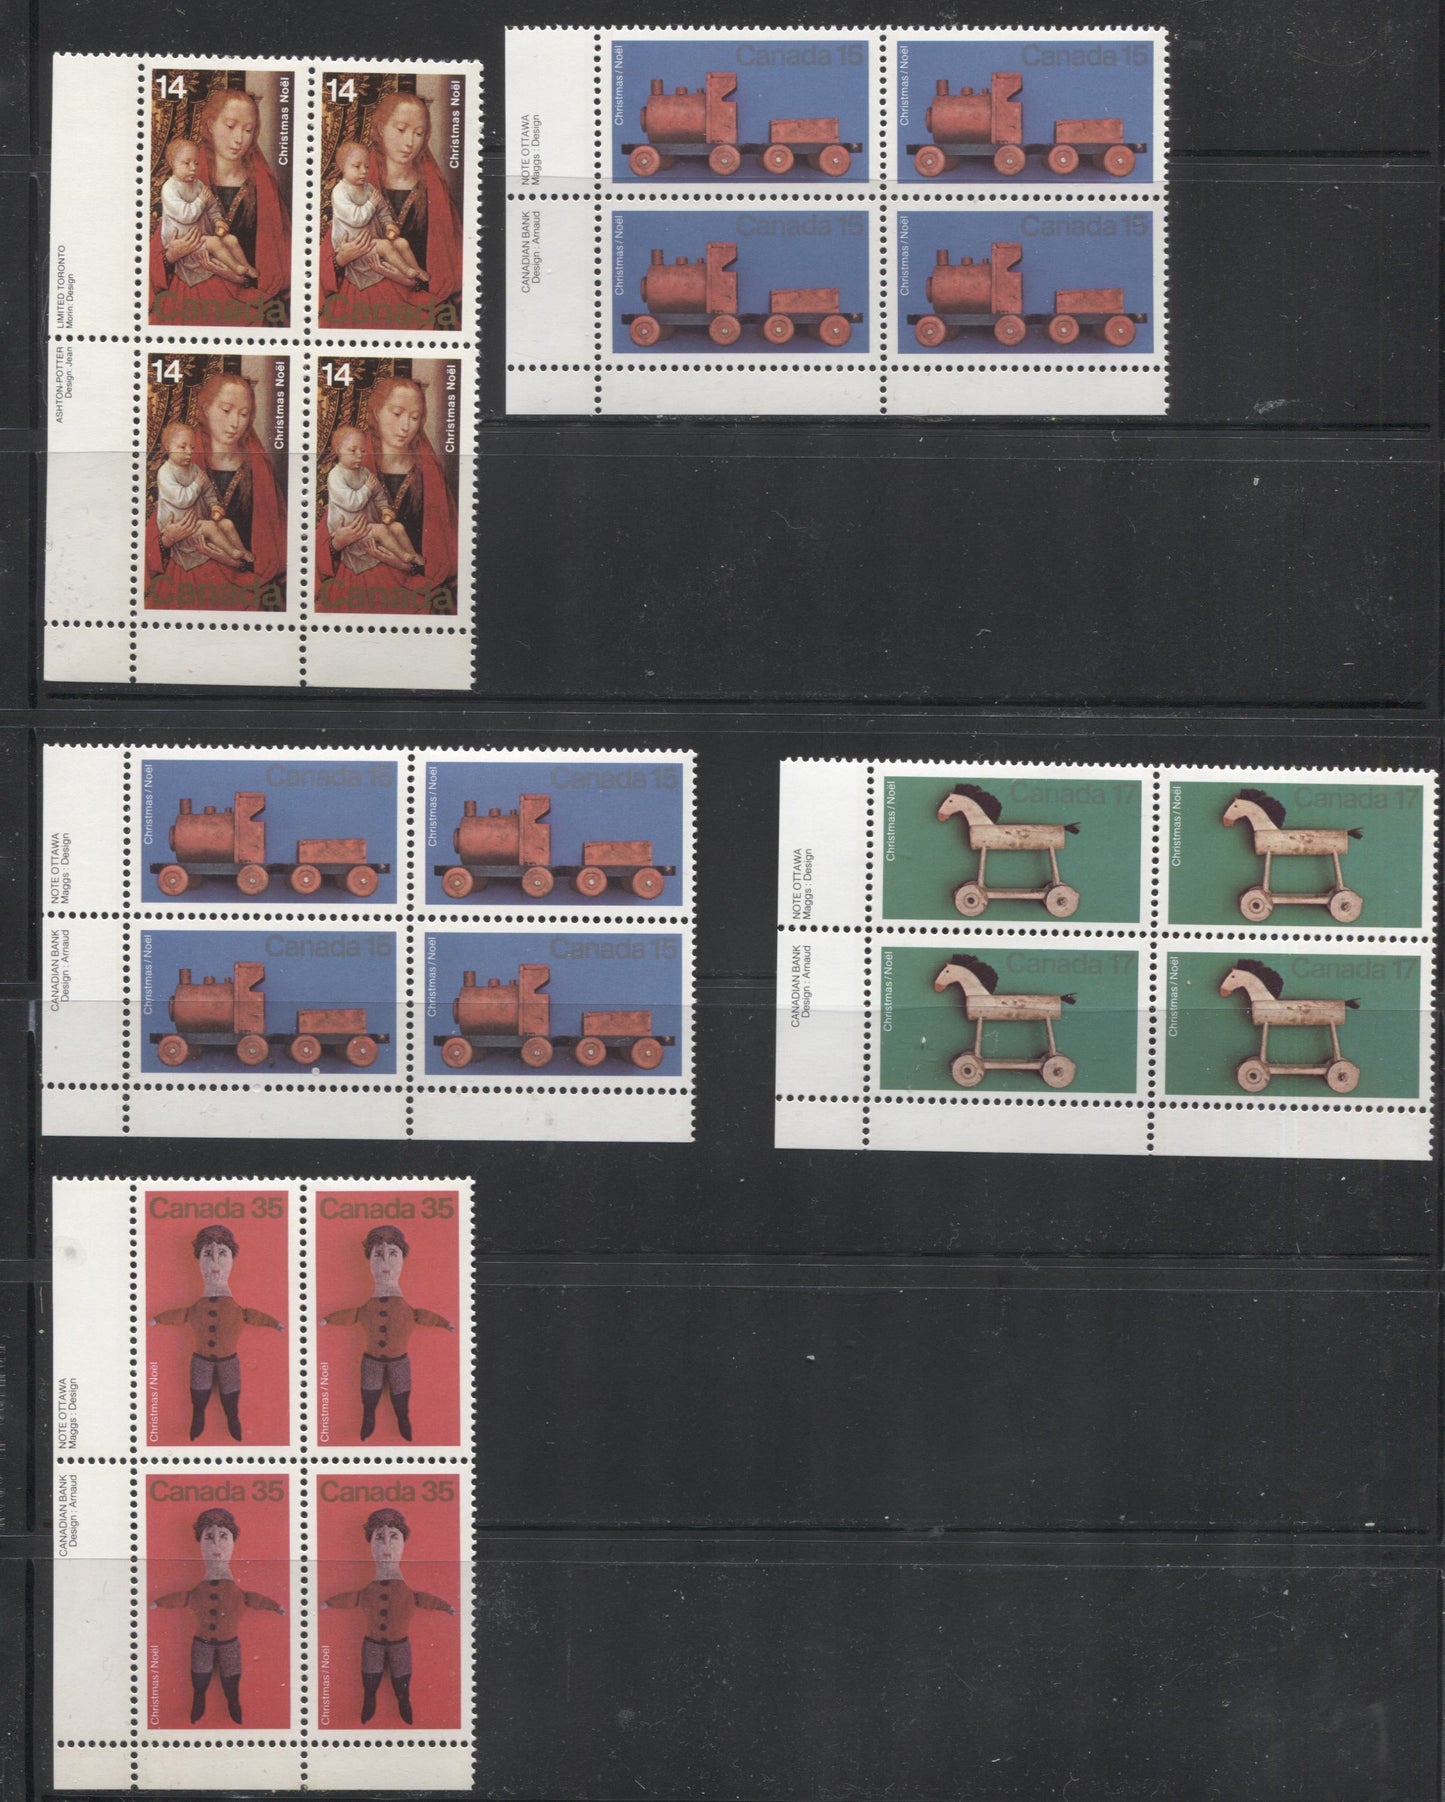 Lot 200 Canada #741/841 1977-1979 Christmas Issues - A Specialized Lot of 11 VFNH Lower Left Inscription Blocks, With Different Paper Types